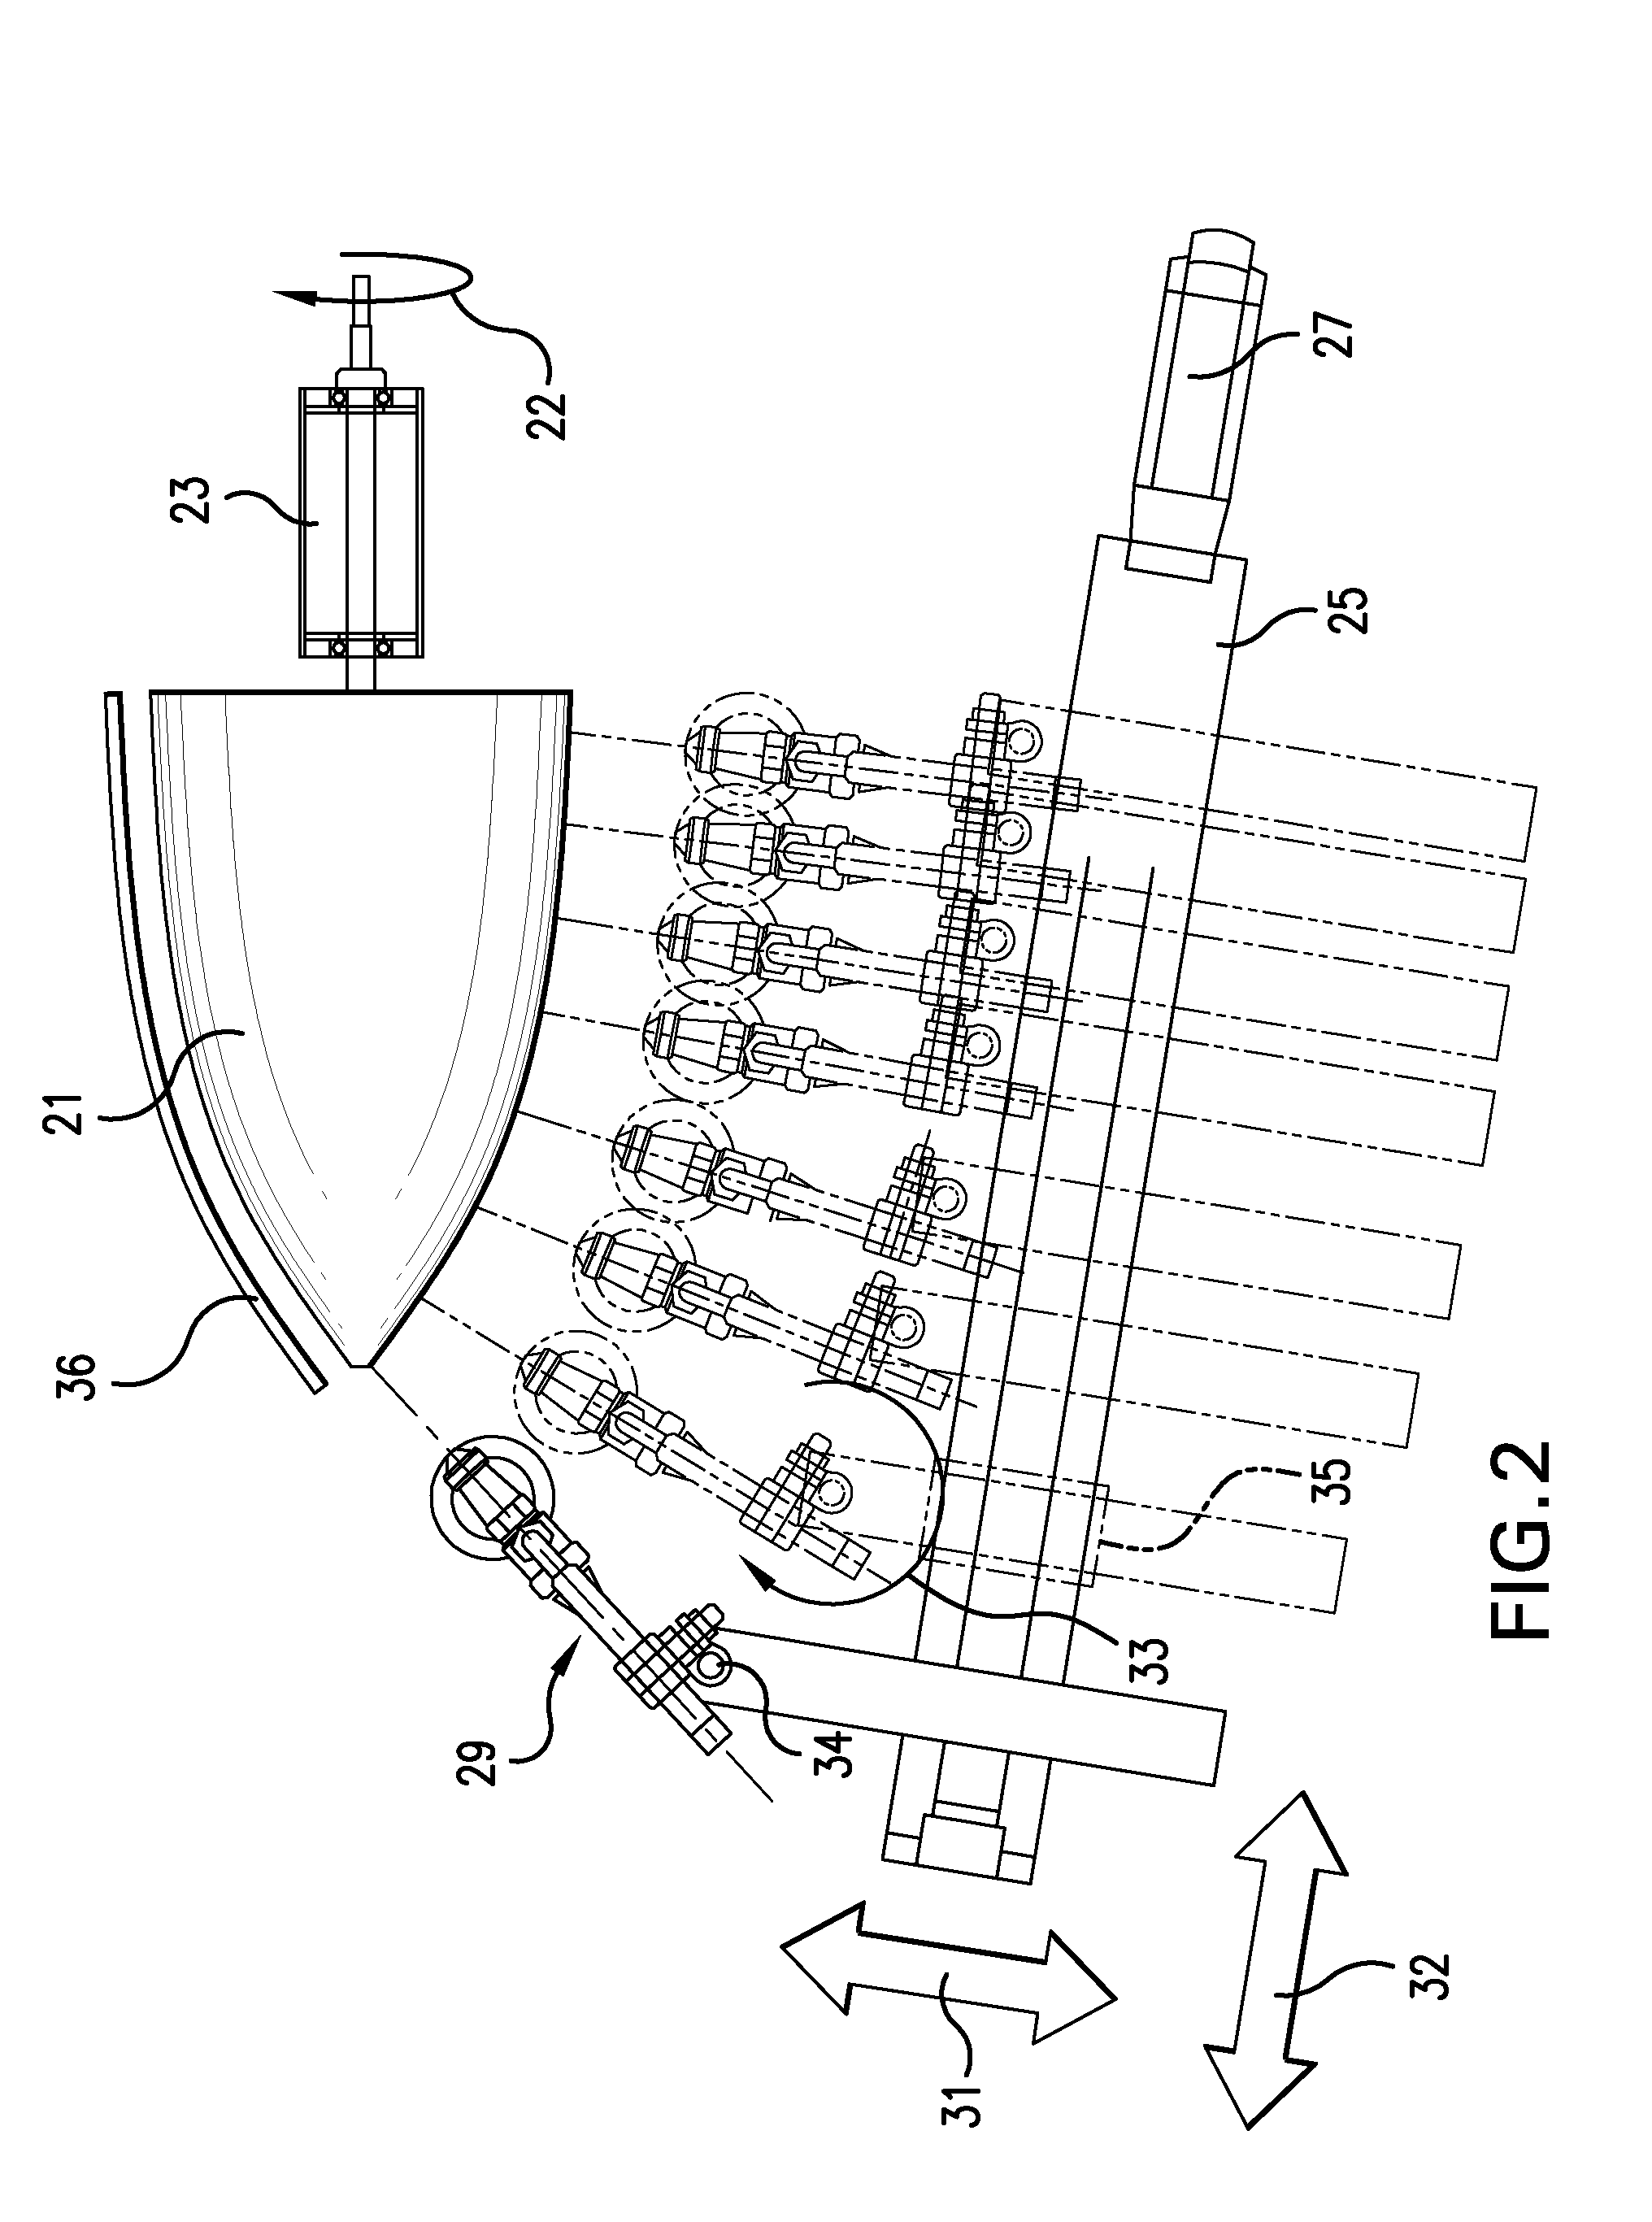 Method and apparatus for applying electronic circuits to curved surfaces